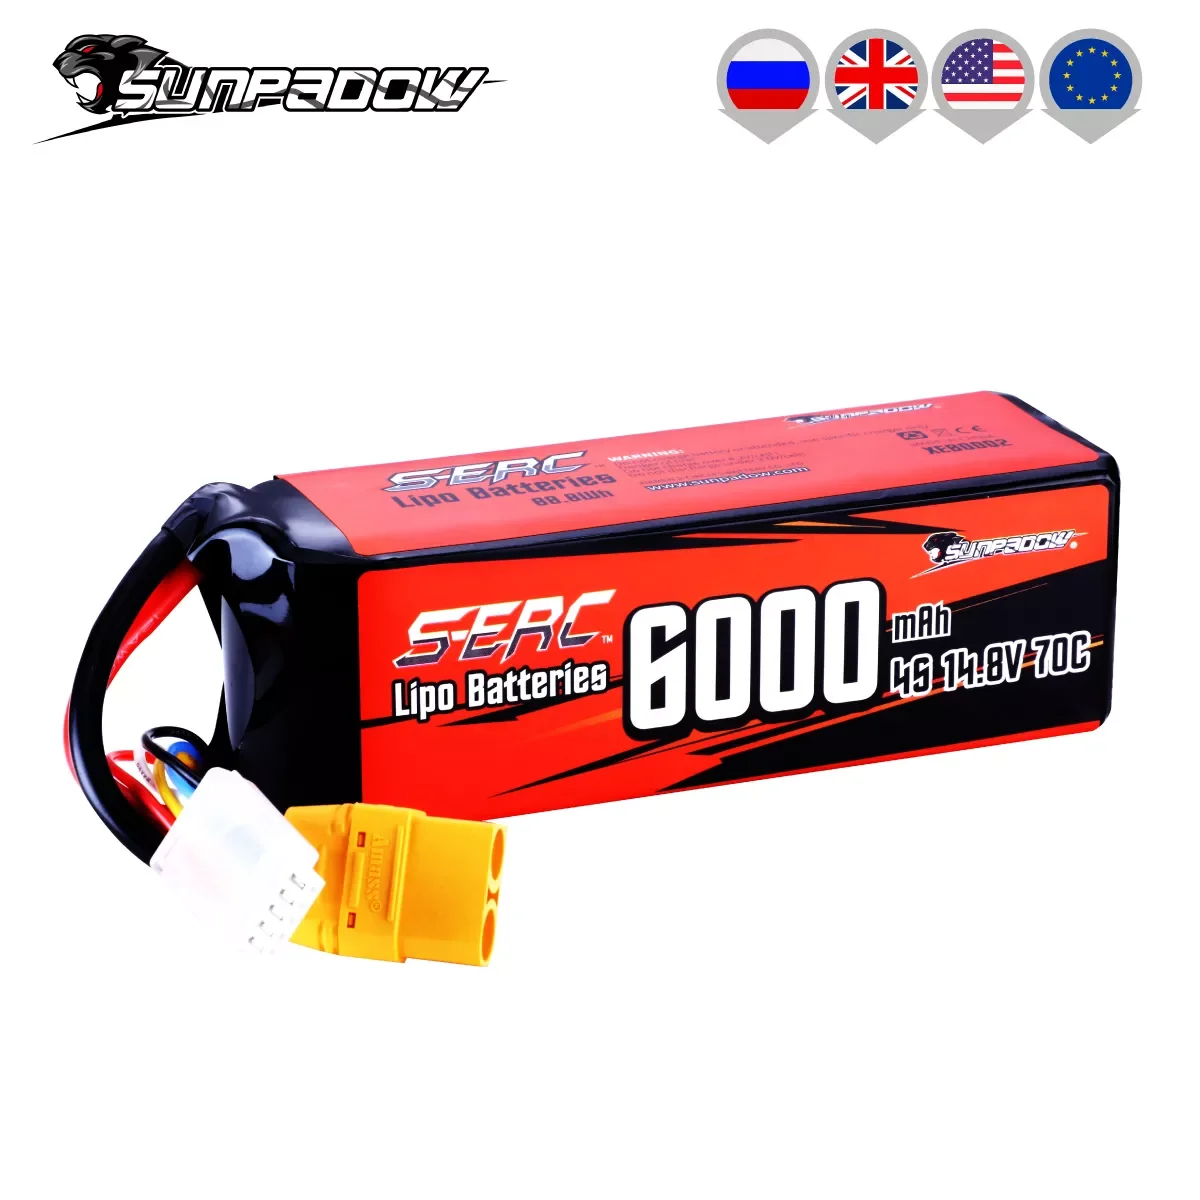 

NEW 4S Lipo Battery 14.8V 6000mAh 70C Soft Pack with XT90 Connector for RC Buggy Truggy Vehicle Car Truck Tank Racing Hobby